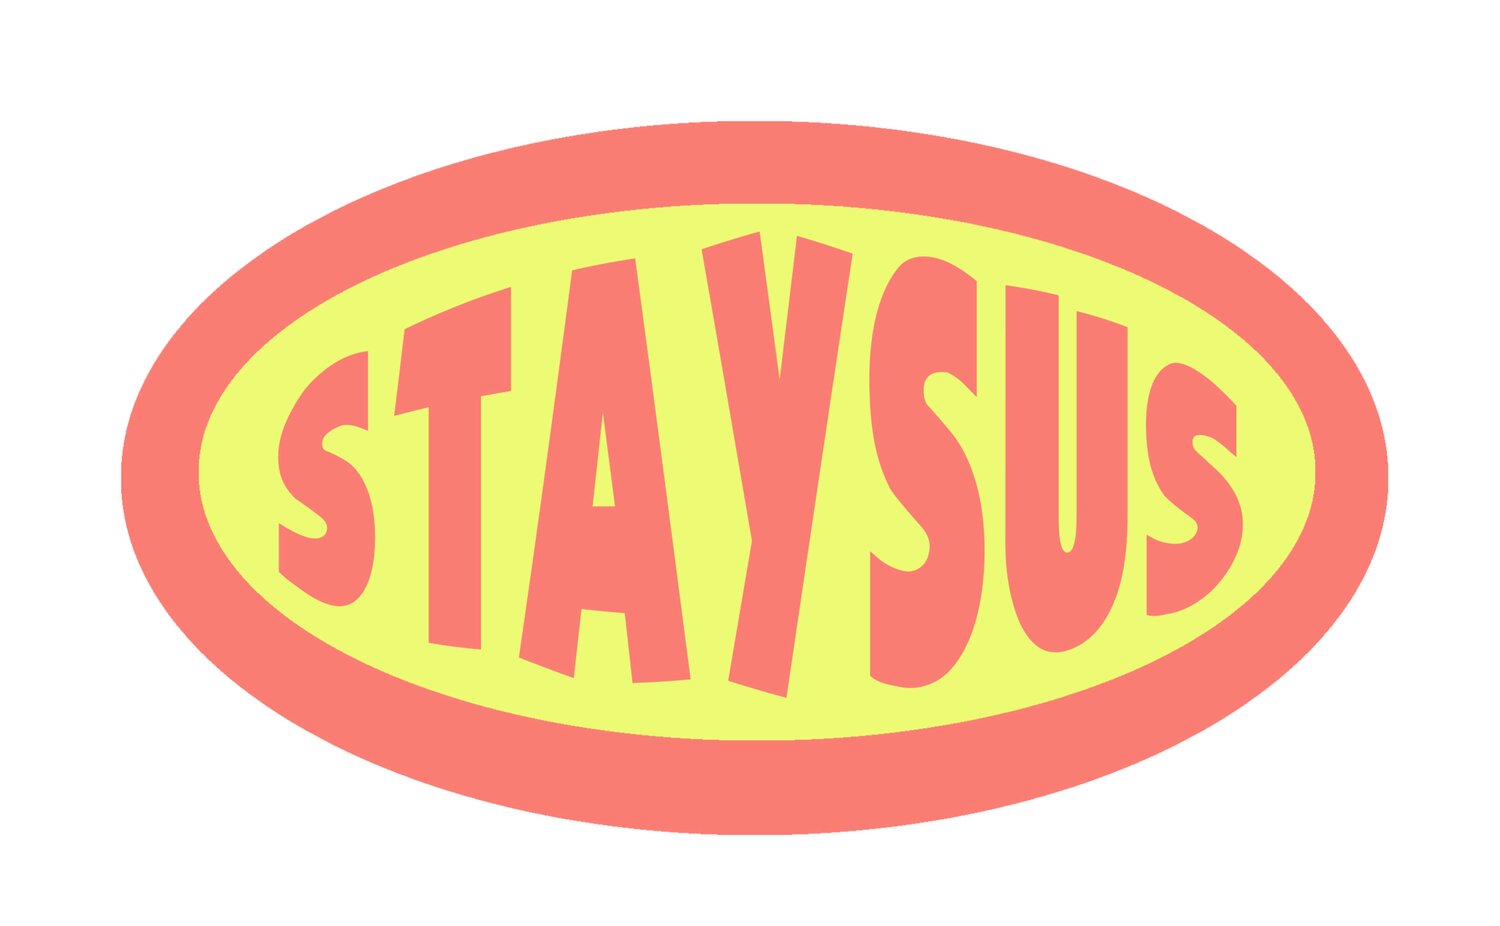 STAY SUS